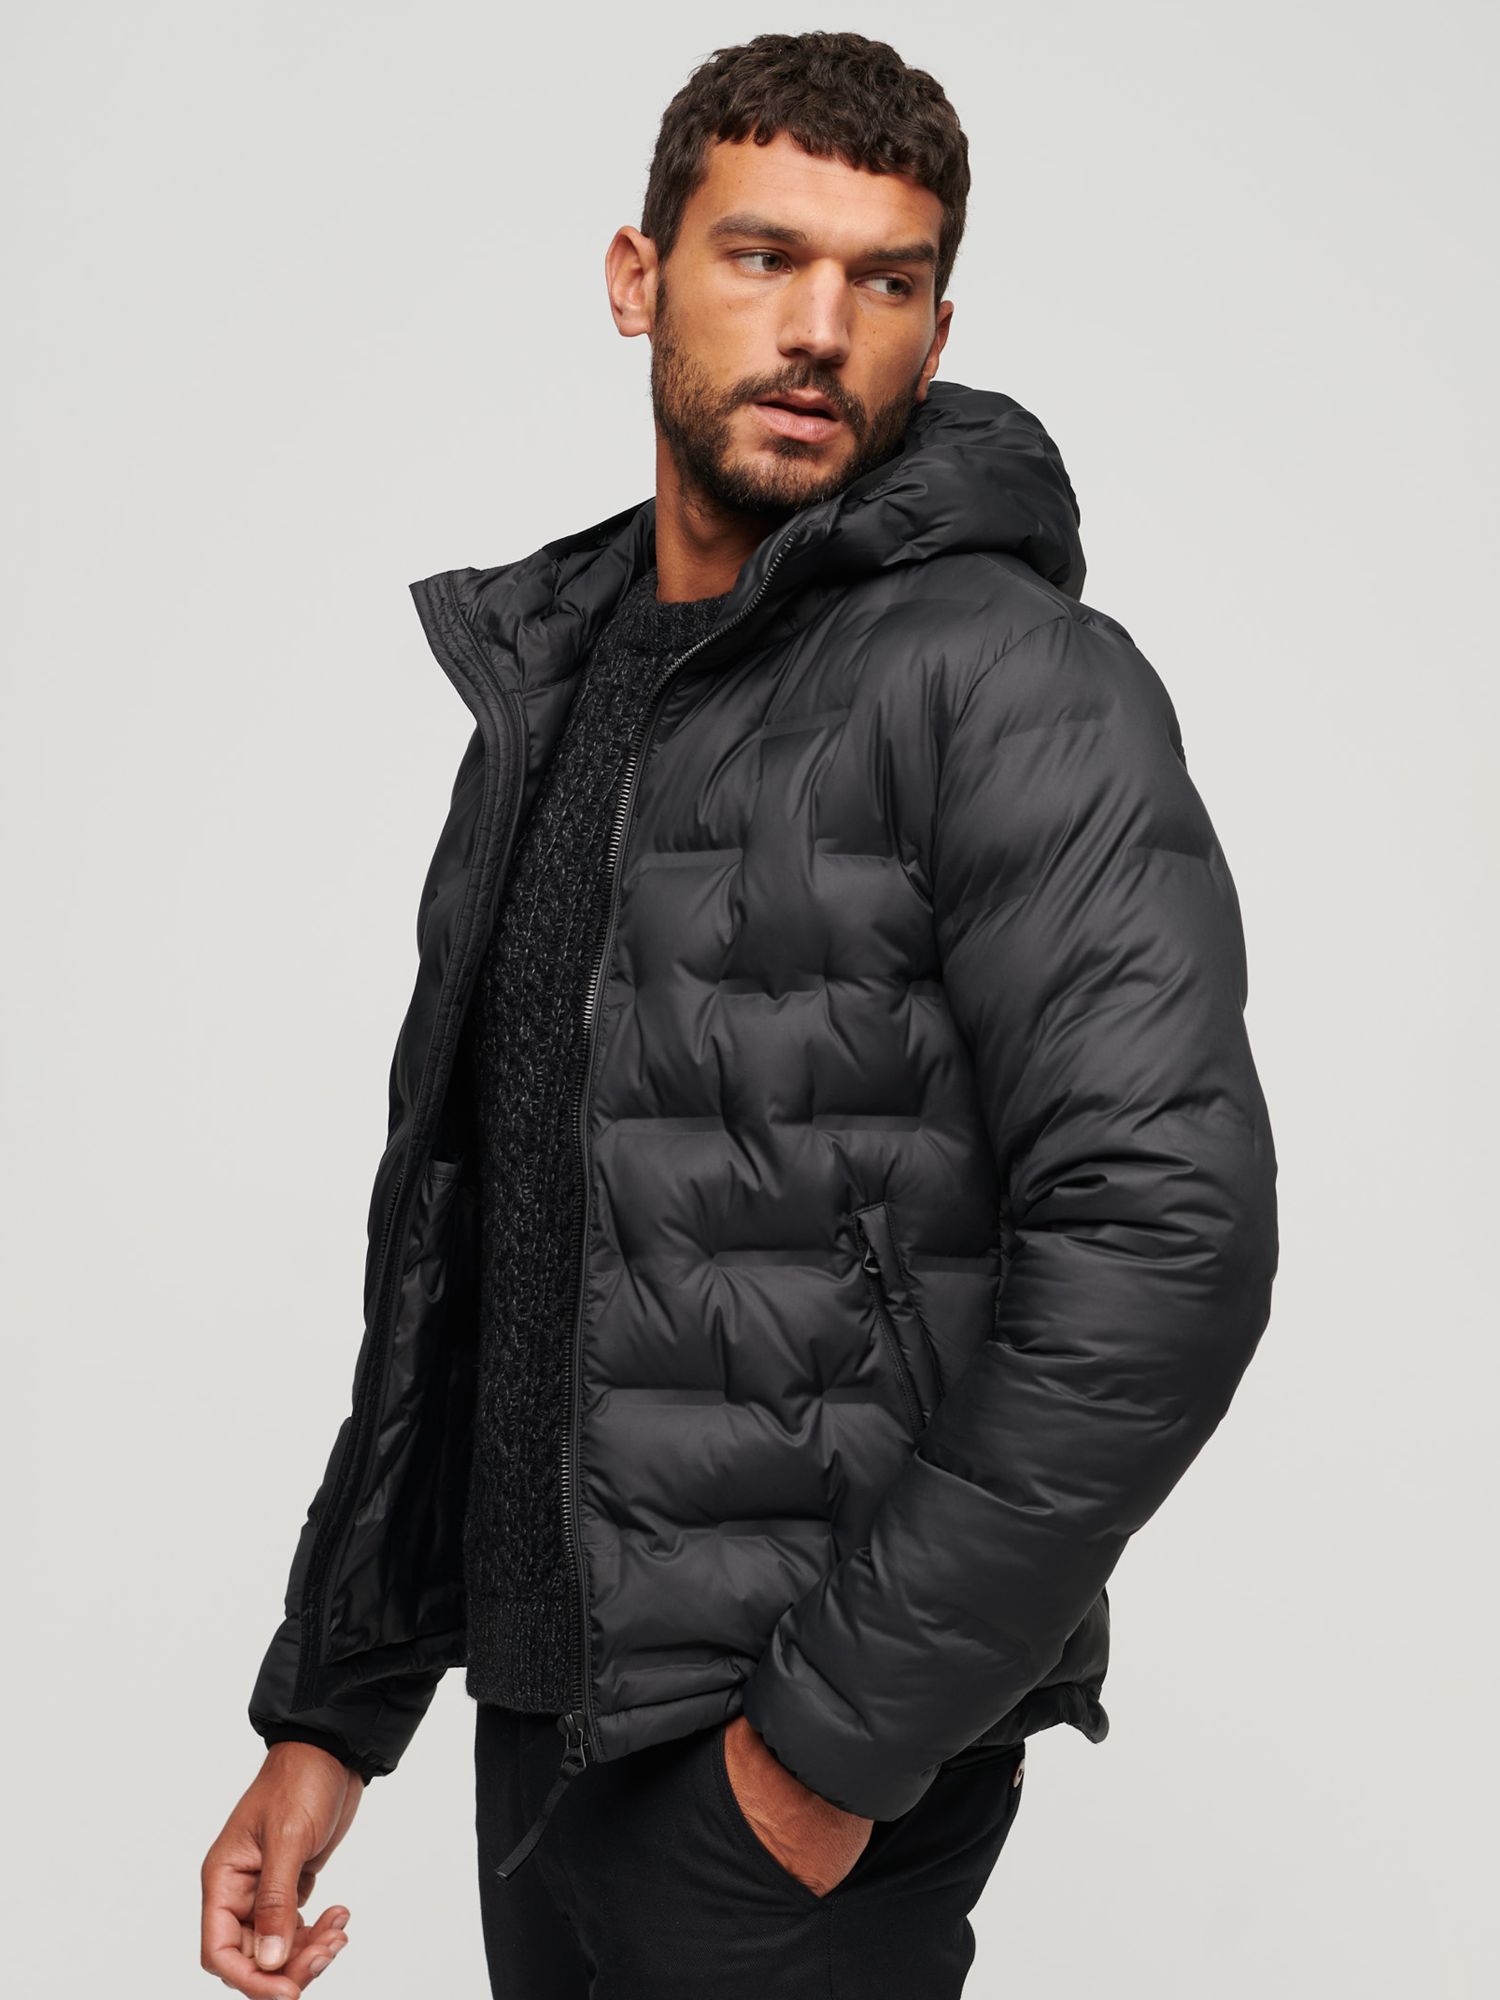 Superdry Short Quilted Puffer Jacket, Black at John Lewis & Partners